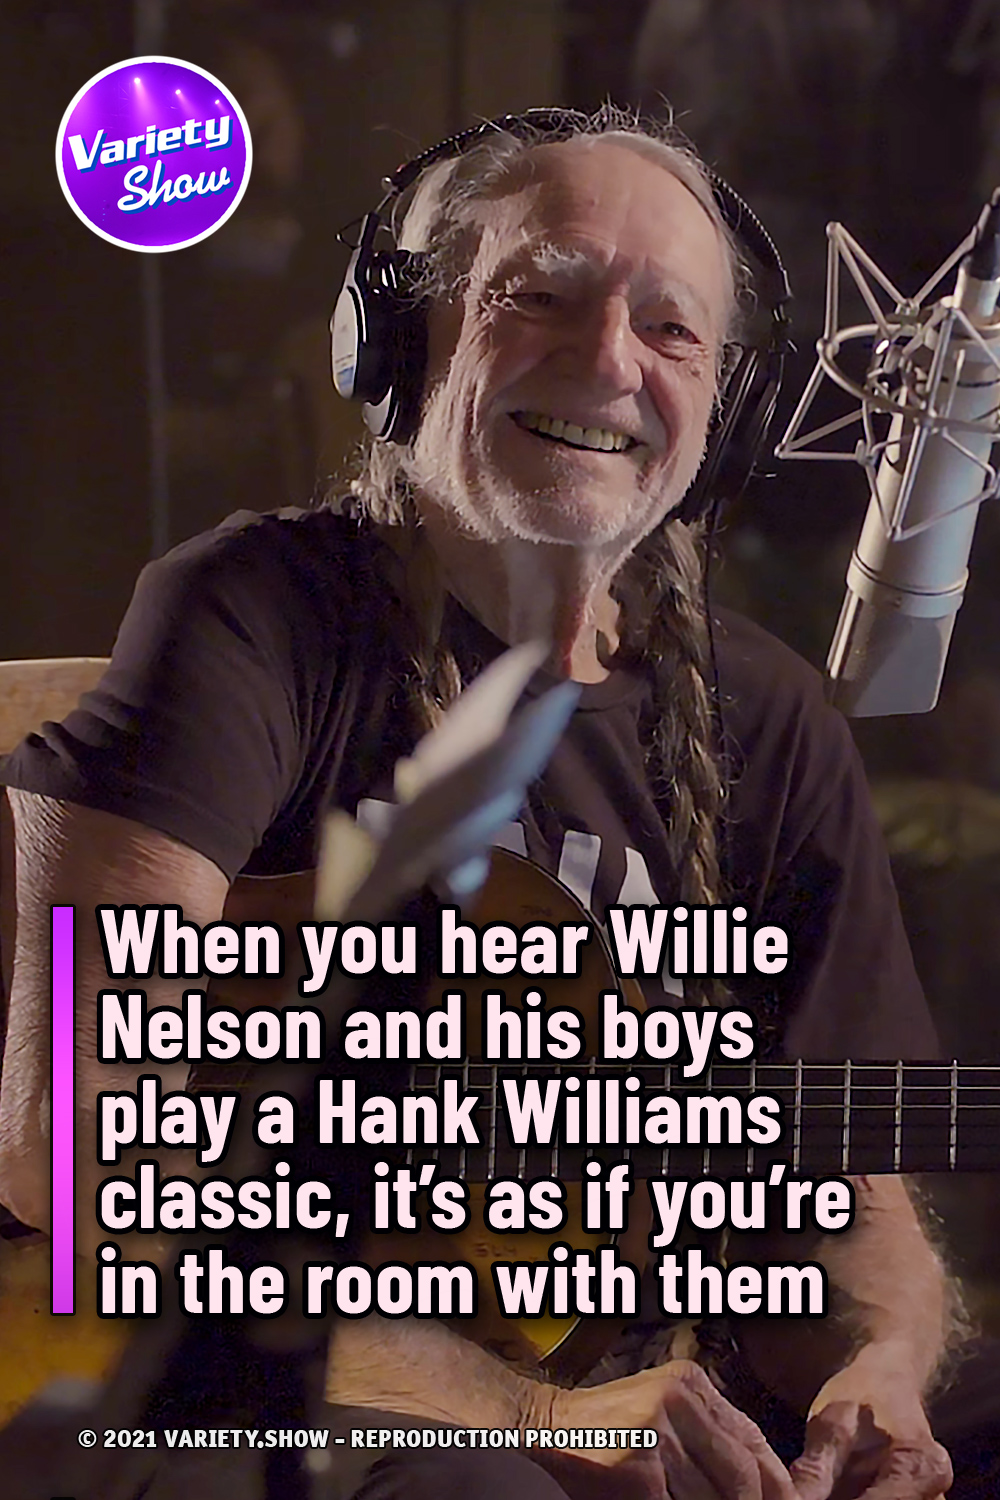 When you hear Willie Nelson and his boys play a Hank Williams classic, it’s as if you’re in the room with them